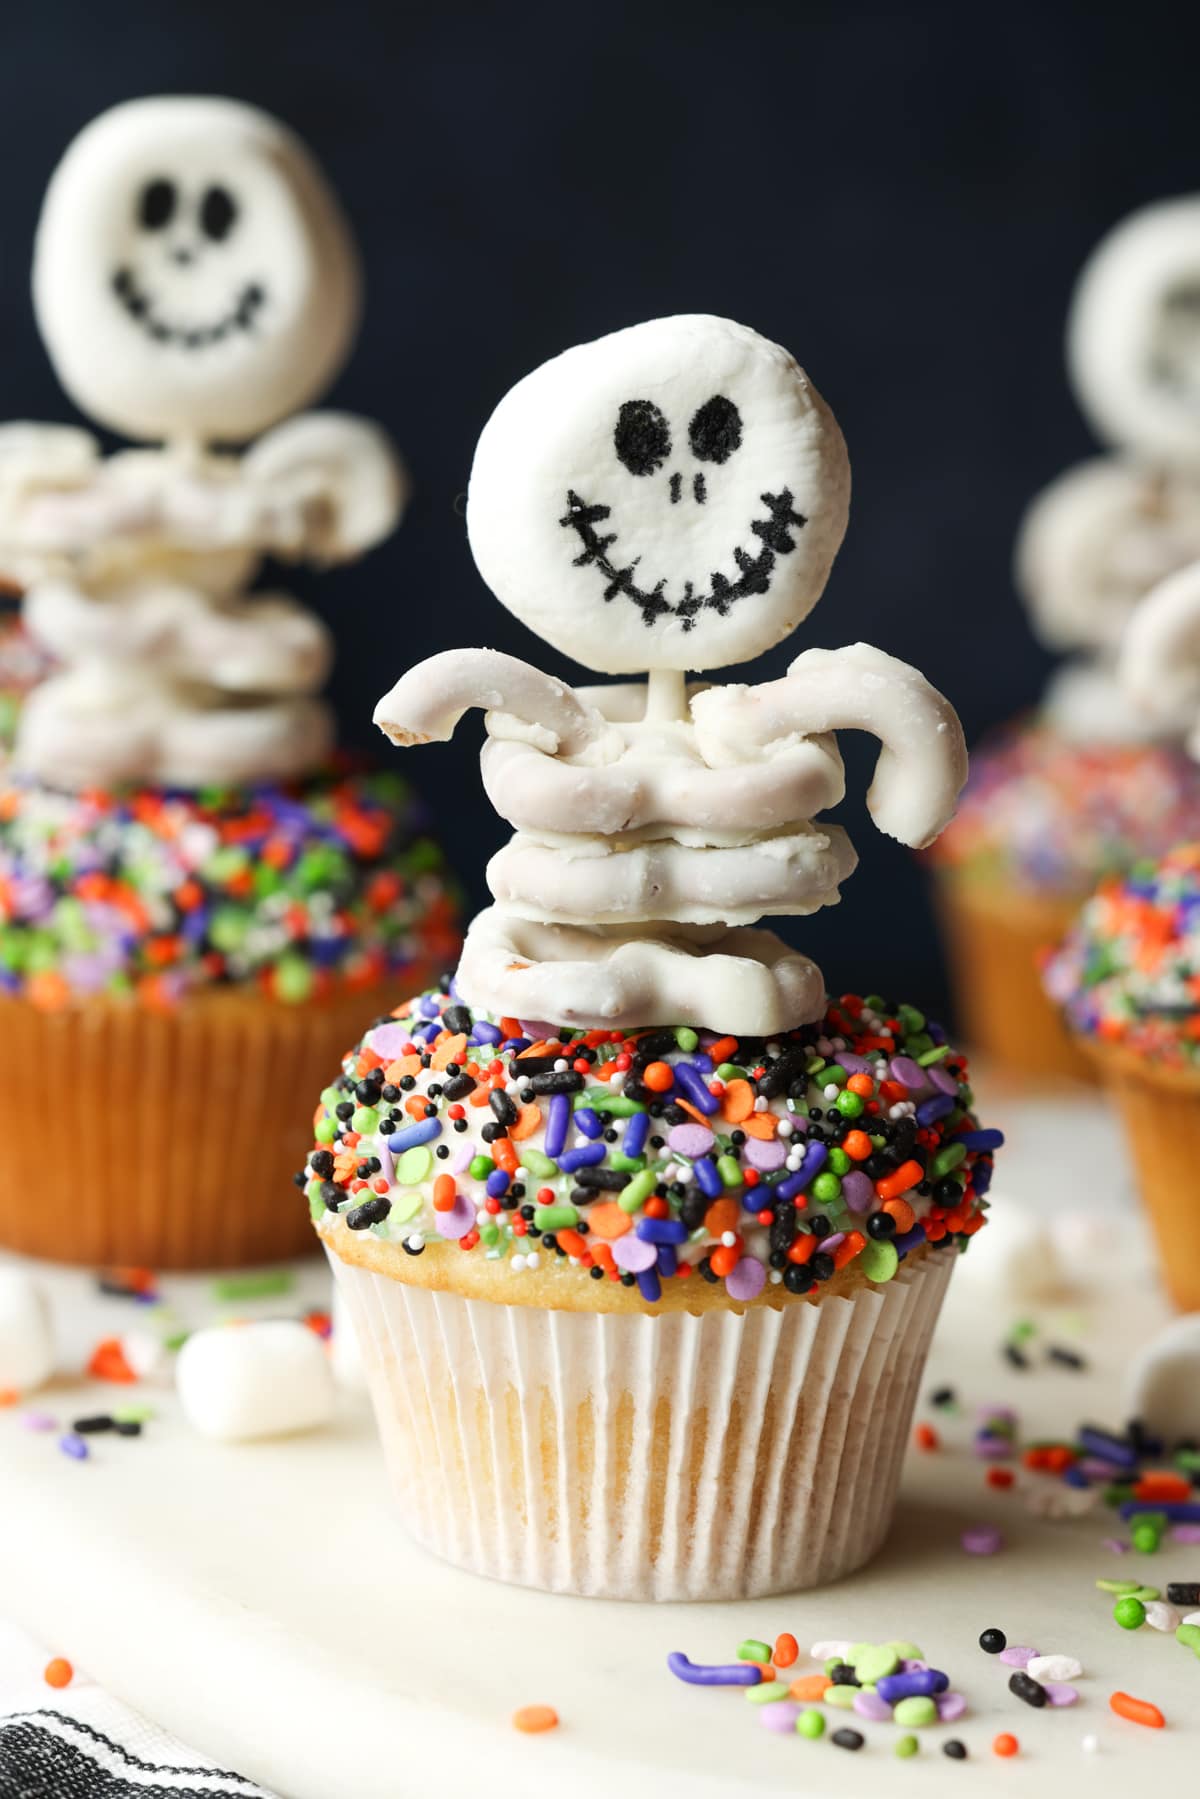 A halloween cupcake topped with a skeleton made from marshmallows and white chocolate covered pretzels